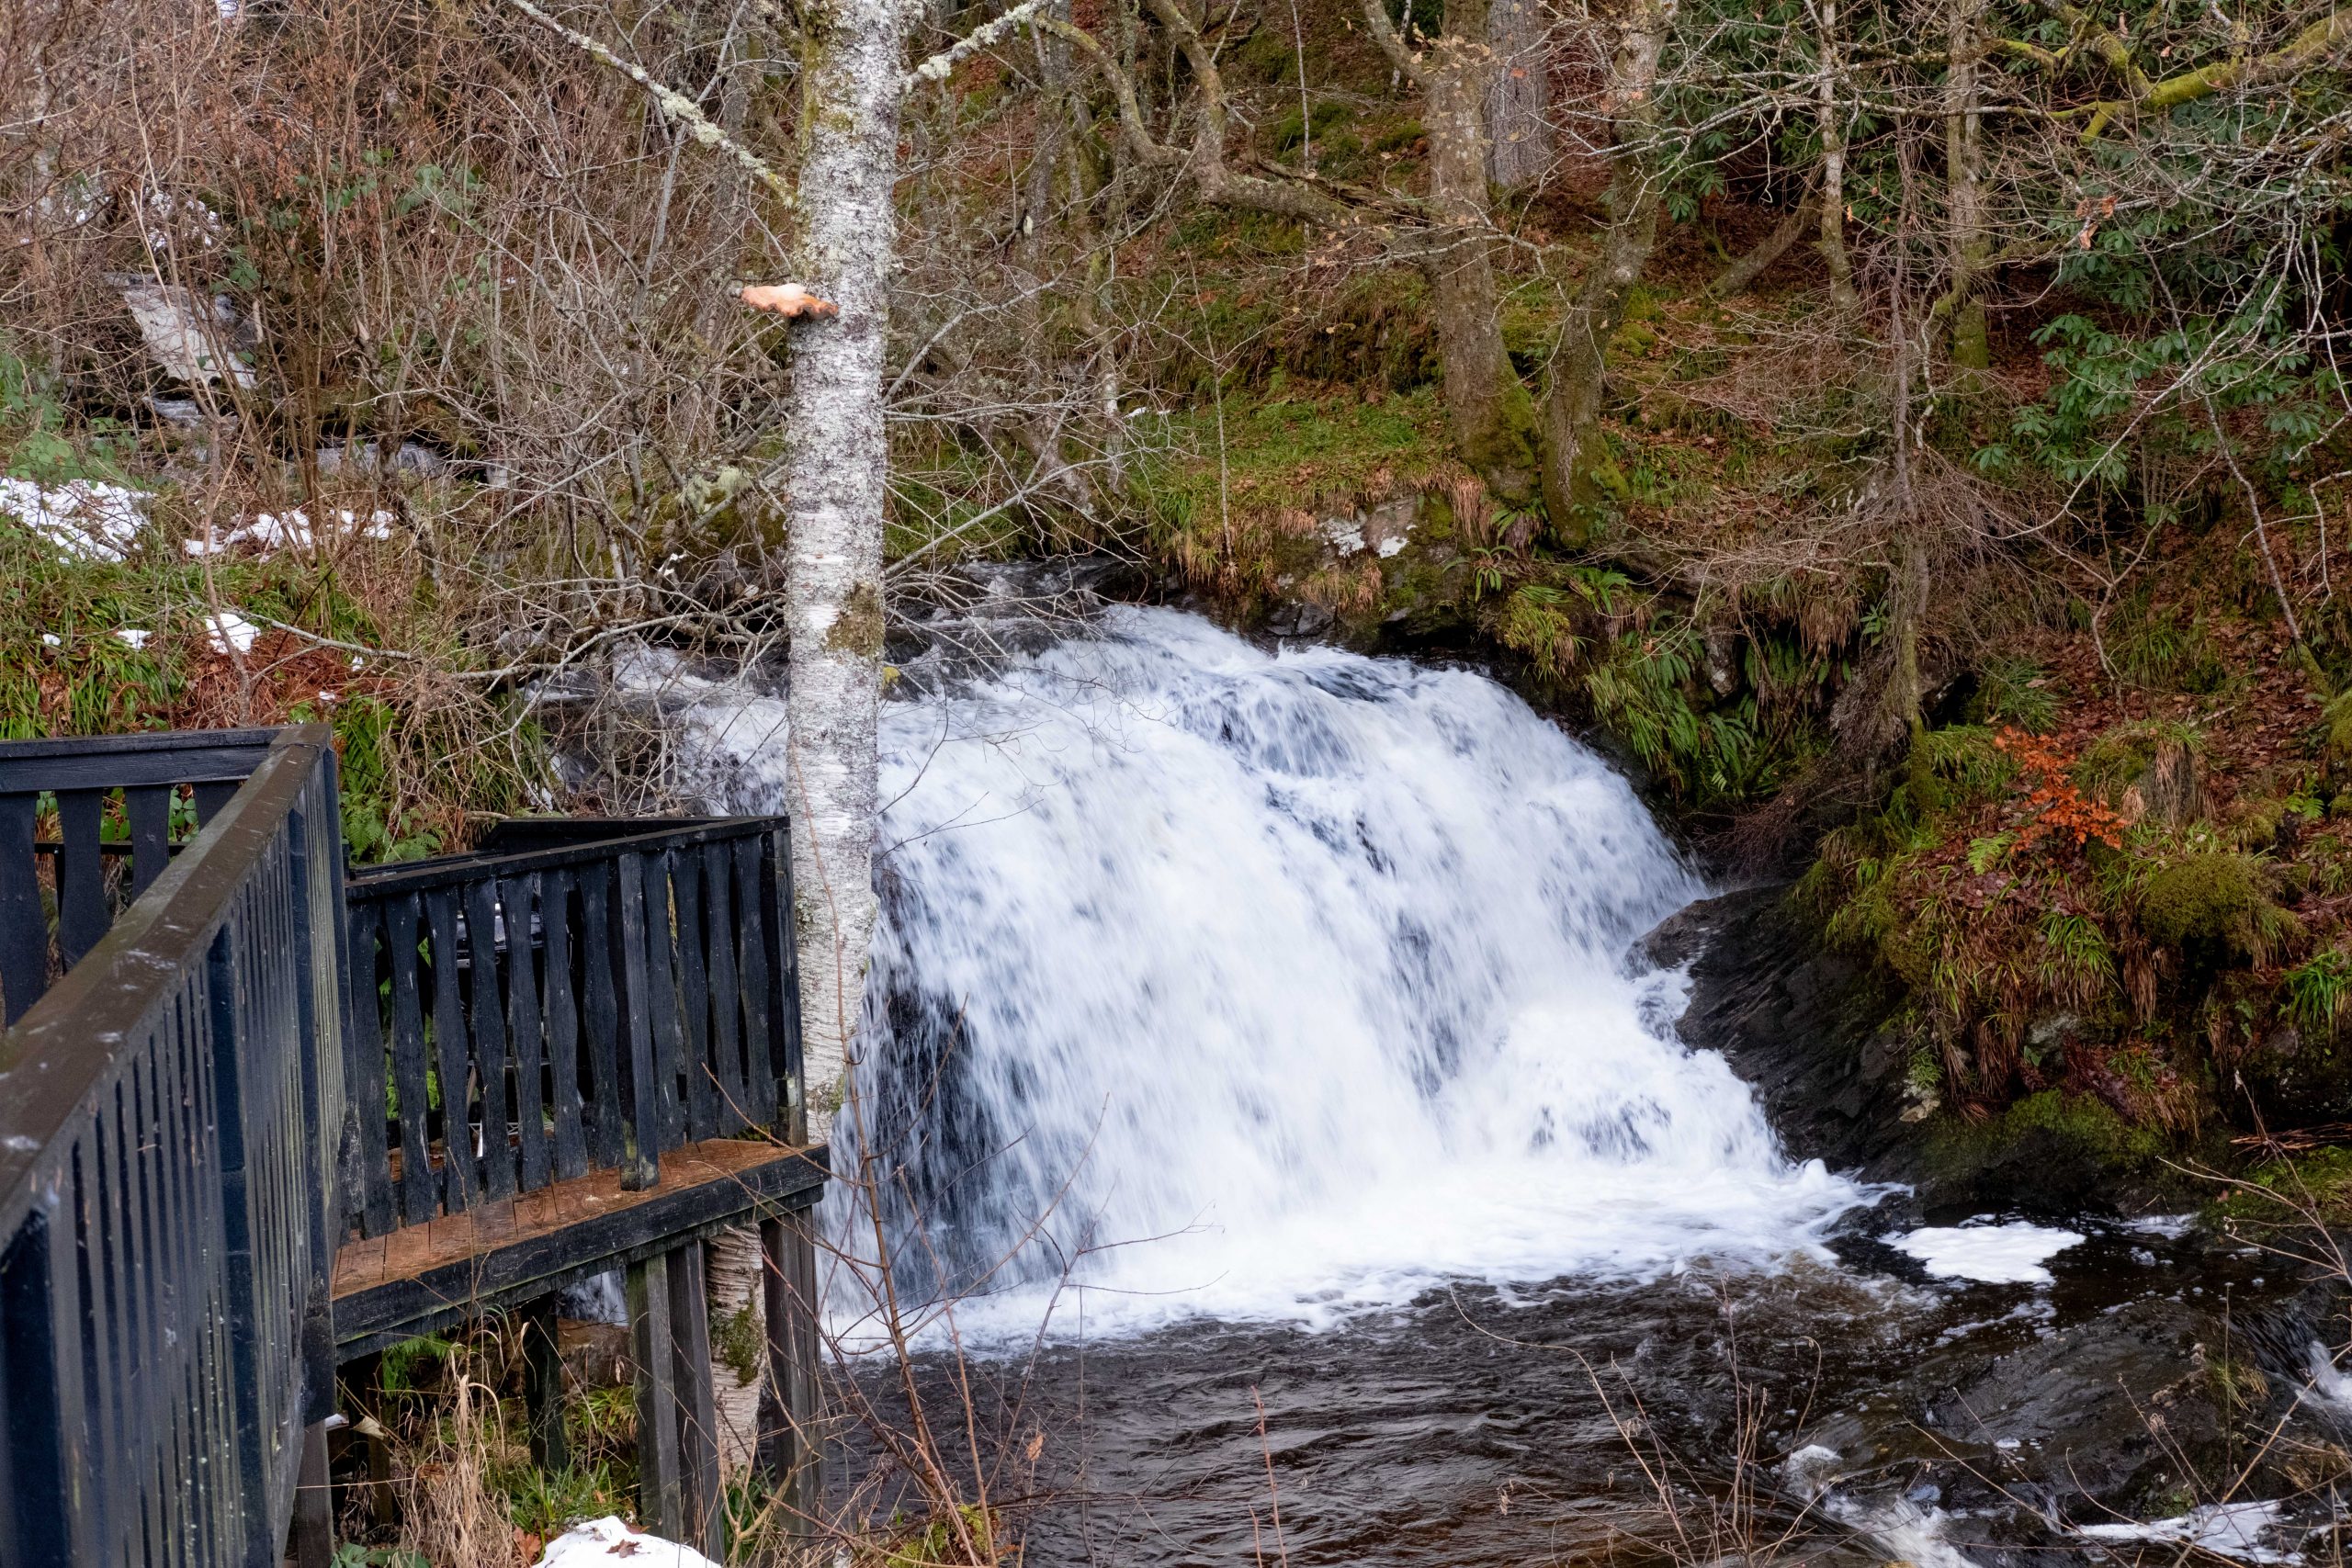 The waterfall at the lodge Loch Tay